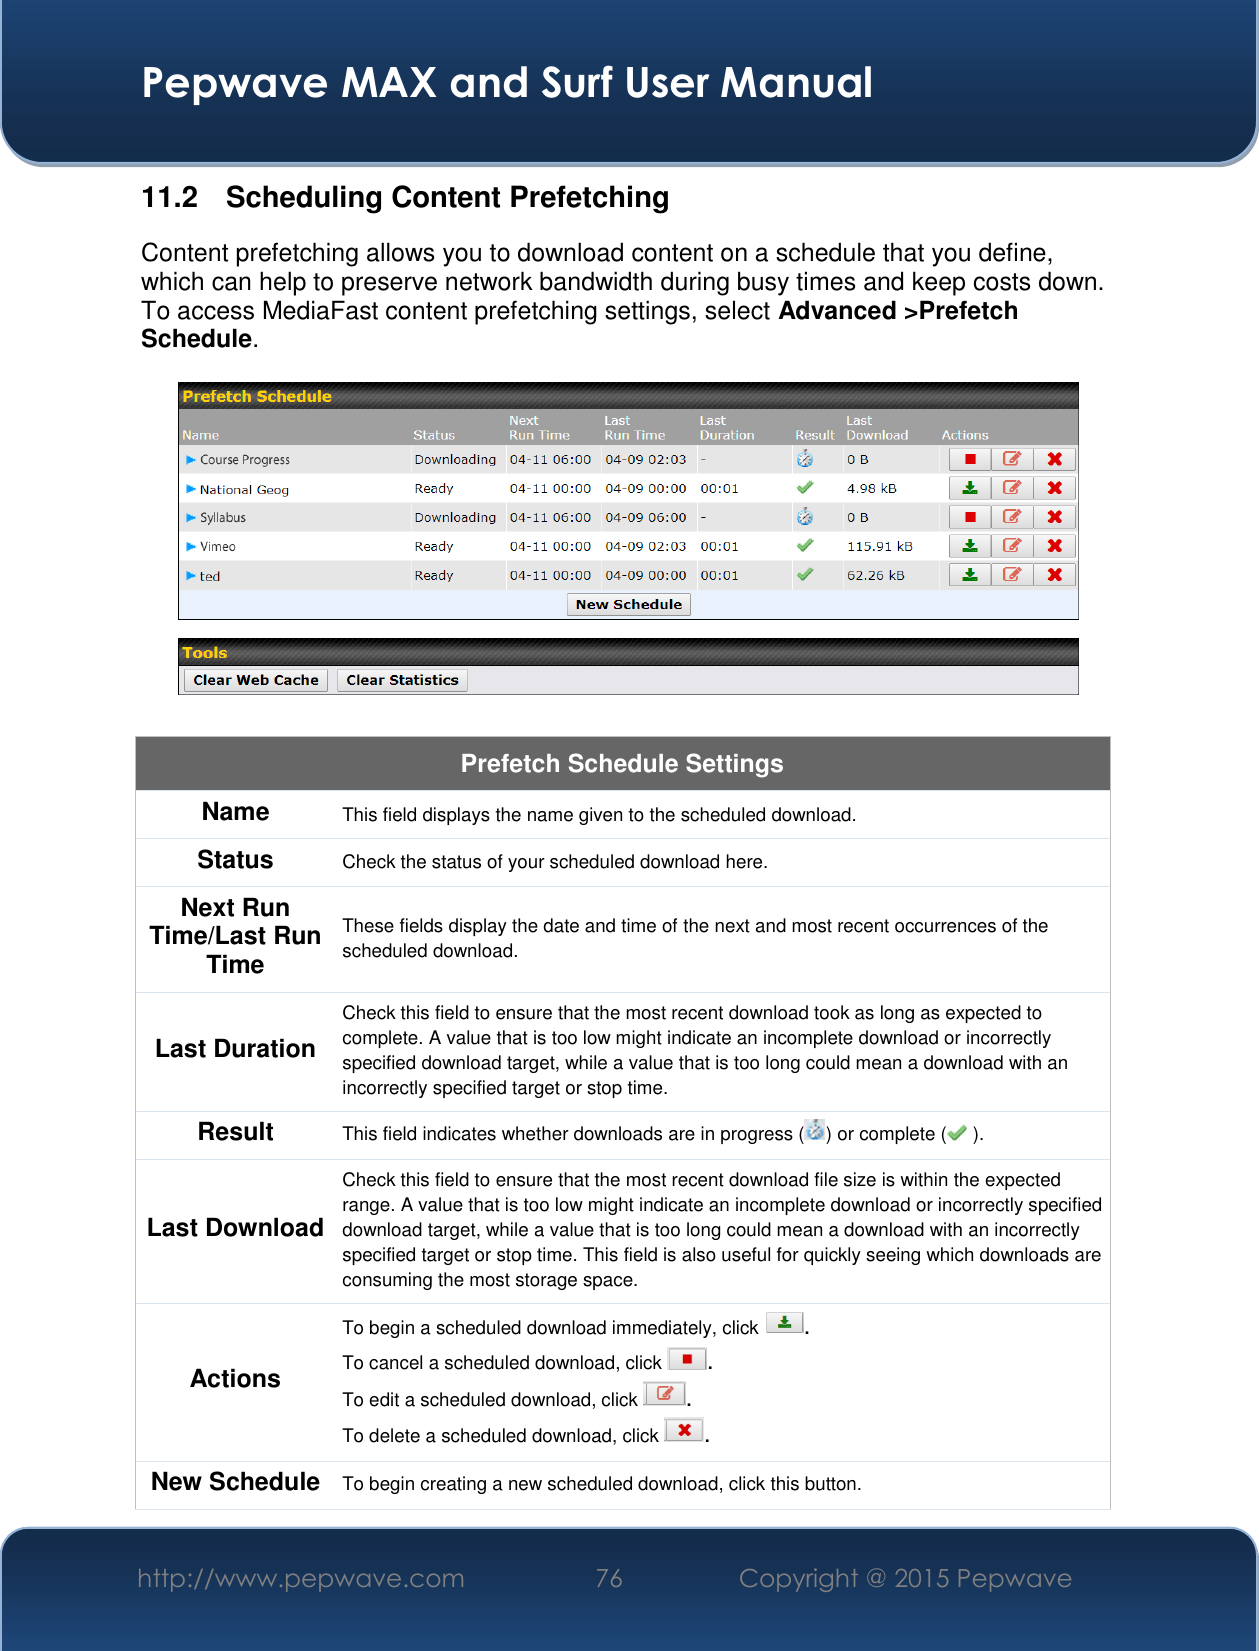  Pepwave MAX and Surf User Manual http://www.pepwave.com 76   Copyright @ 2015 Pepwave   11.2   Scheduling Content Prefetching Content prefetching allows you to download content on a schedule that you define, which can help to preserve network bandwidth during busy times and keep costs down. To access MediaFast content prefetching settings, select Advanced &gt;Prefetch Schedule.    Prefetch Schedule Settings Name This field displays the name given to the scheduled download. Status Check the status of your scheduled download here. Next Run Time/Last Run Time These fields display the date and time of the next and most recent occurrences of the scheduled download. Last Duration Check this field to ensure that the most recent download took as long as expected to complete. A value that is too low might indicate an incomplete download or incorrectly specified download target, while a value that is too long could mean a download with an incorrectly specified target or stop time. Result This field indicates whether downloads are in progress ( ) or complete (  ). Last Download Check this field to ensure that the most recent download file size is within the expected range. A value that is too low might indicate an incomplete download or incorrectly specified download target, while a value that is too long could mean a download with an incorrectly specified target or stop time. This field is also useful for quickly seeing which downloads are consuming the most storage space. Actions To begin a scheduled download immediately, click  . To cancel a scheduled download, click  . To edit a scheduled download, click  . To delete a scheduled download, click  . New Schedule To begin creating a new scheduled download, click this button. 